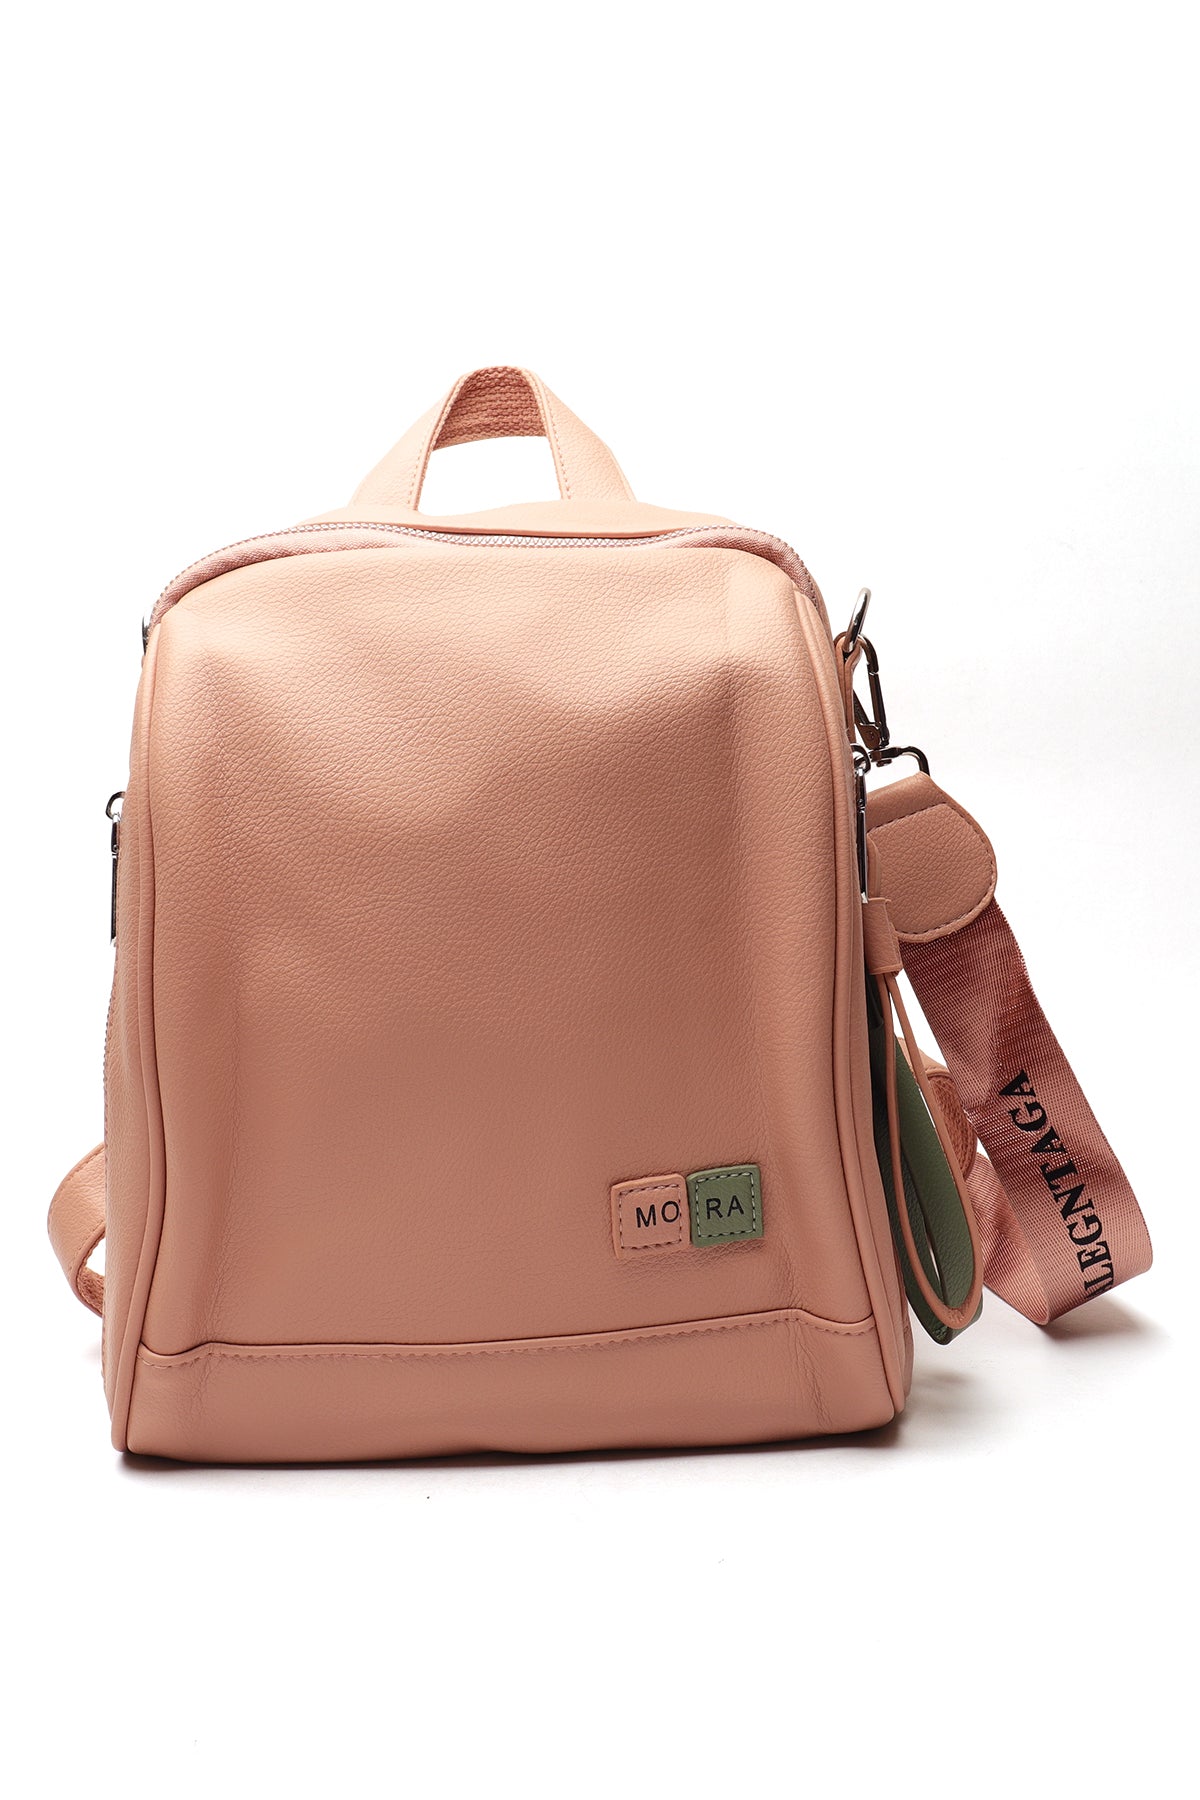 Women's Casual Back Pack